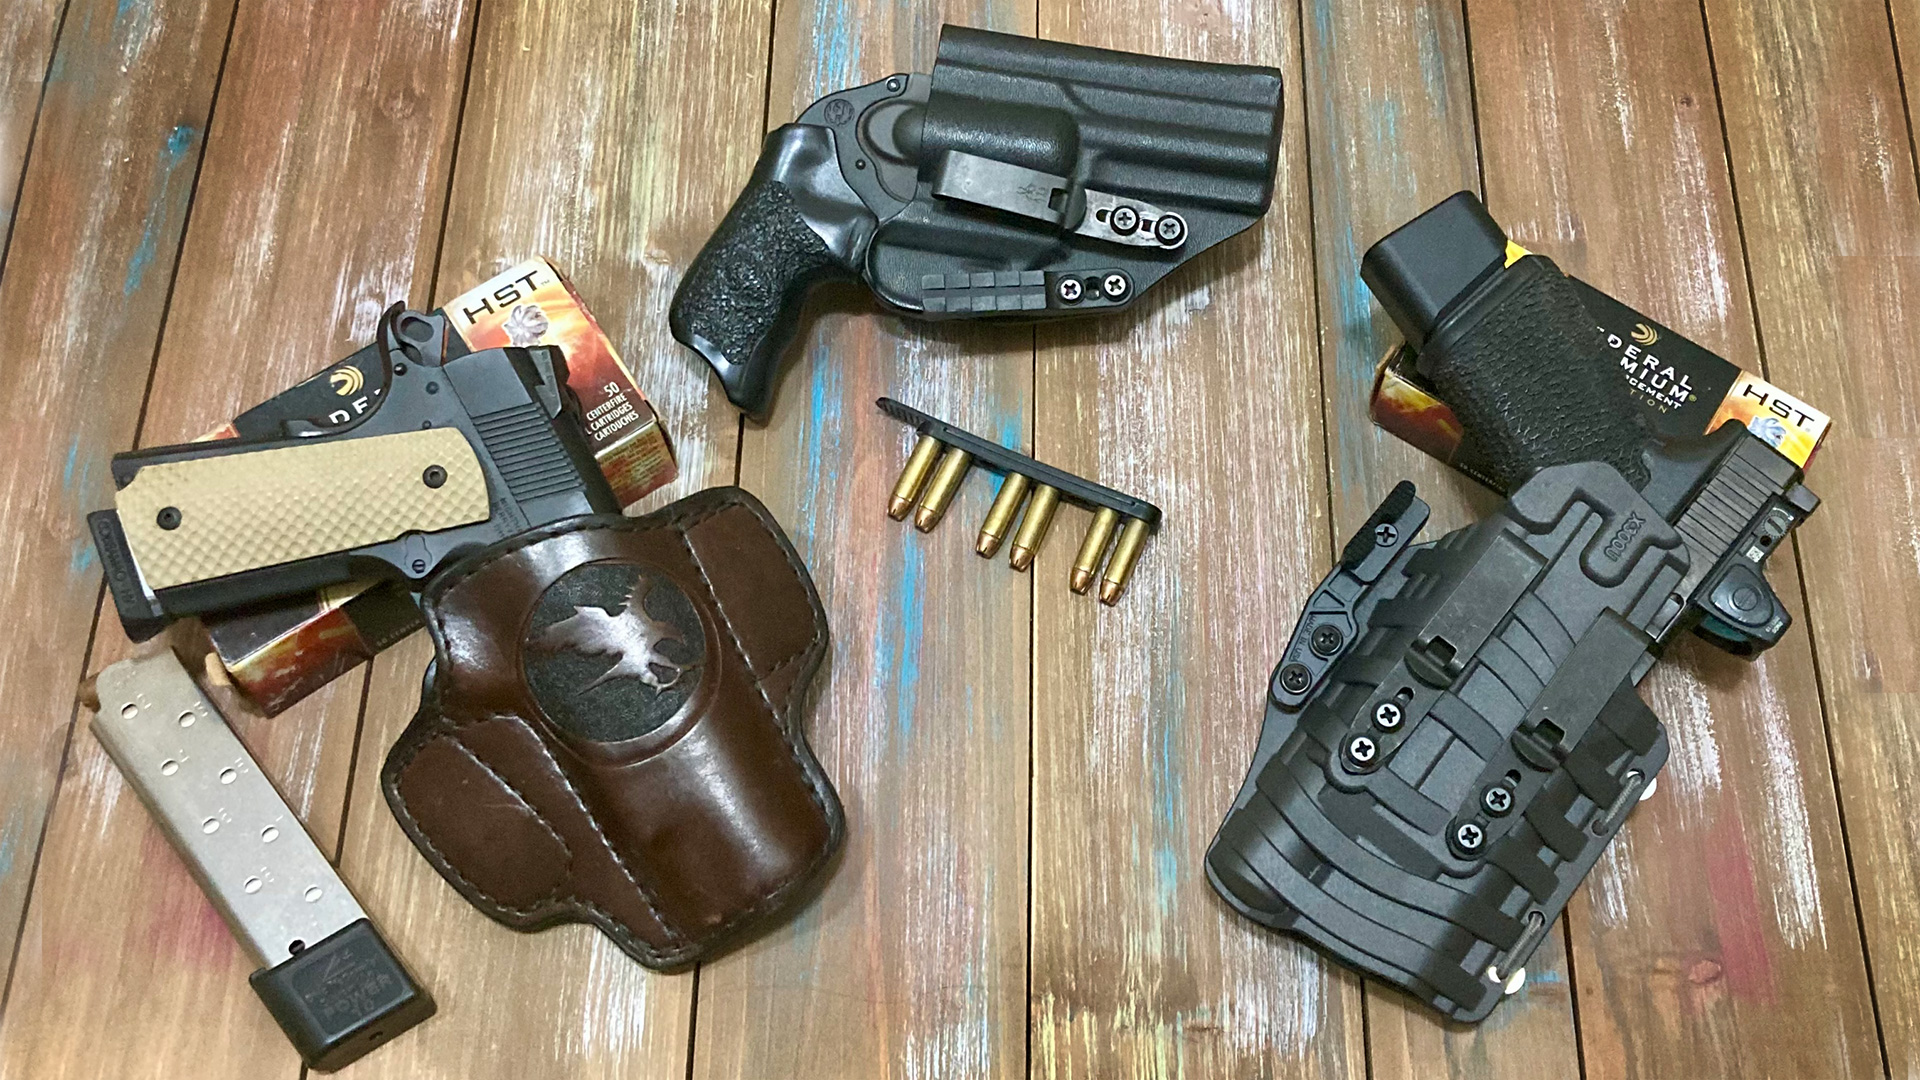 Inside the Waistband Holsters: What You Need to Know